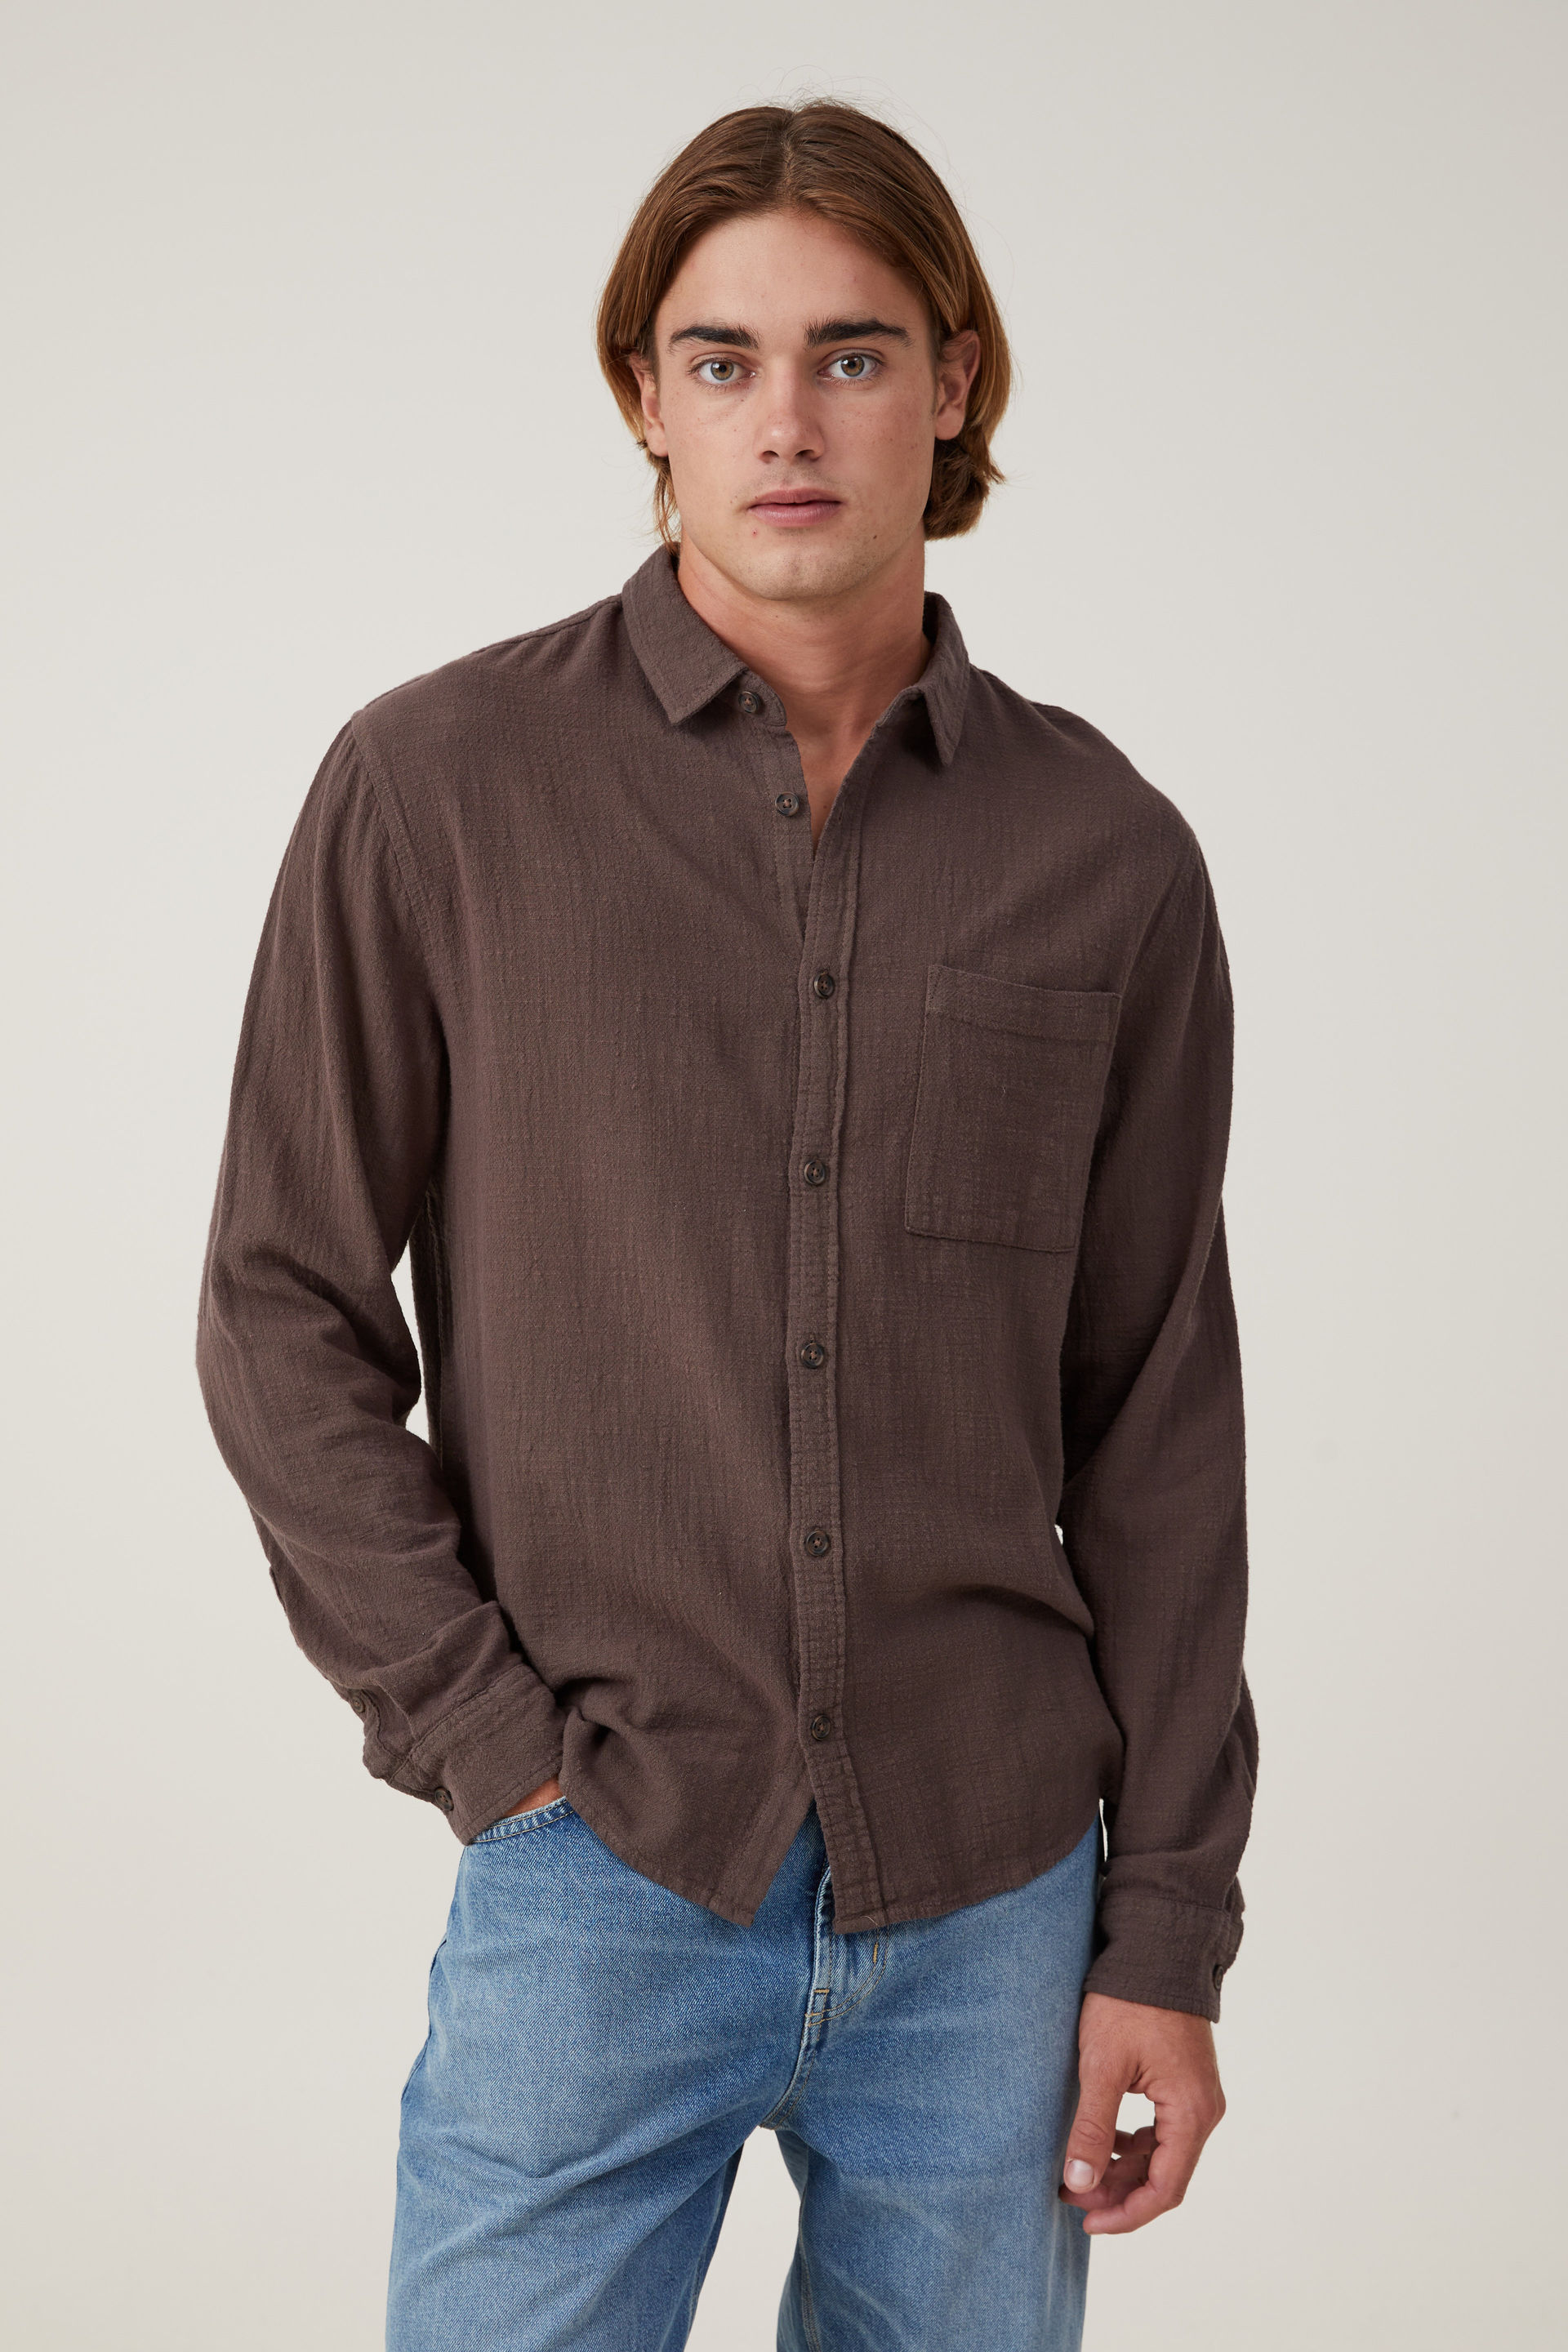 Cotton On Men - Portland Long Sleeve Shirt - Rich brown cheesecloth